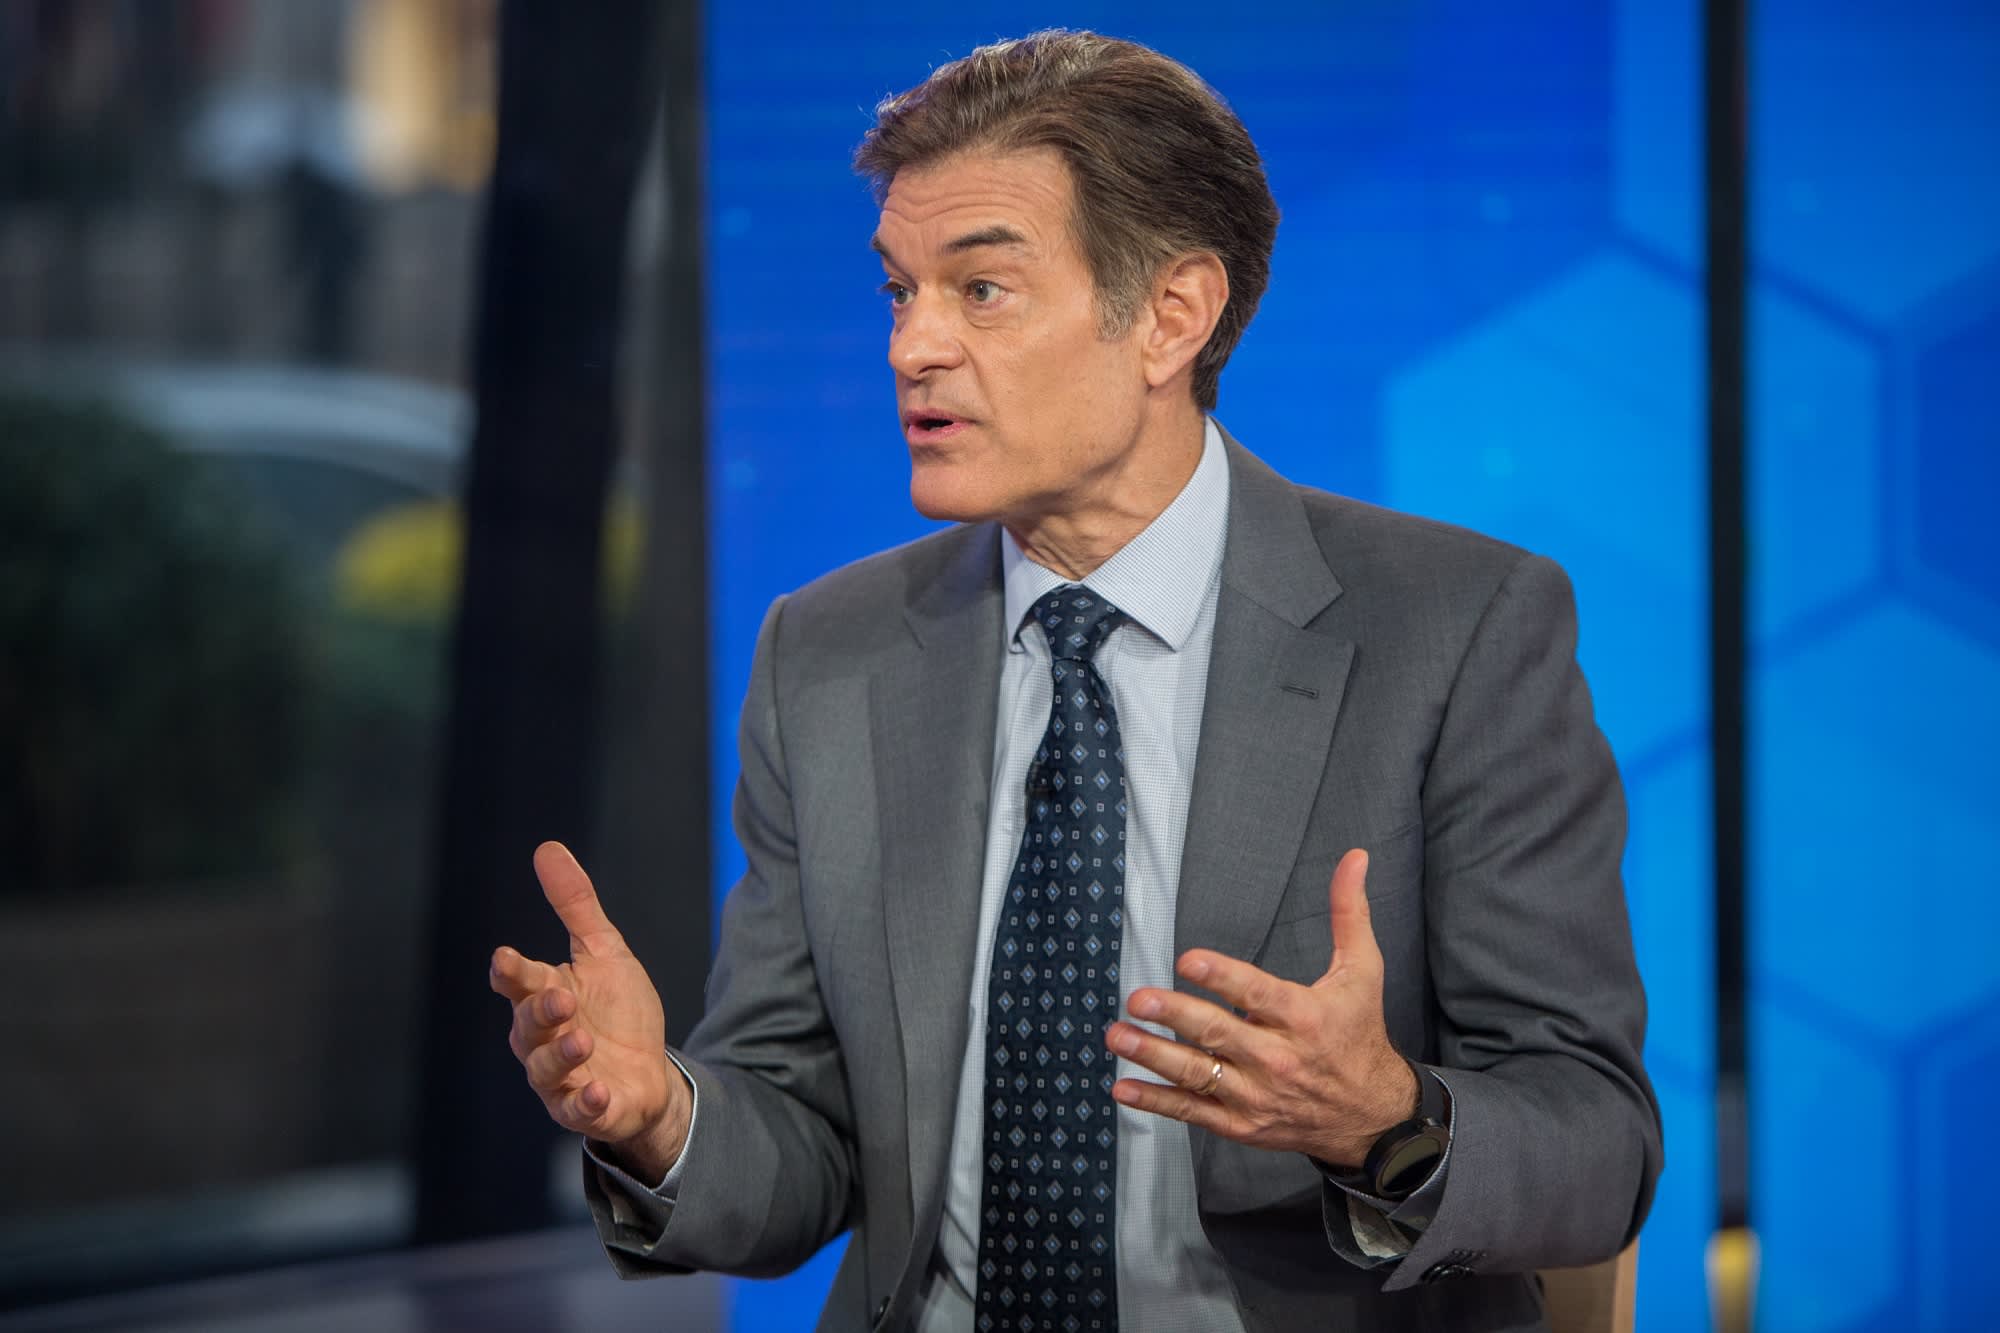 Dr Mehmet Oz is one of the renowned doctors and also a prominent candidate ...